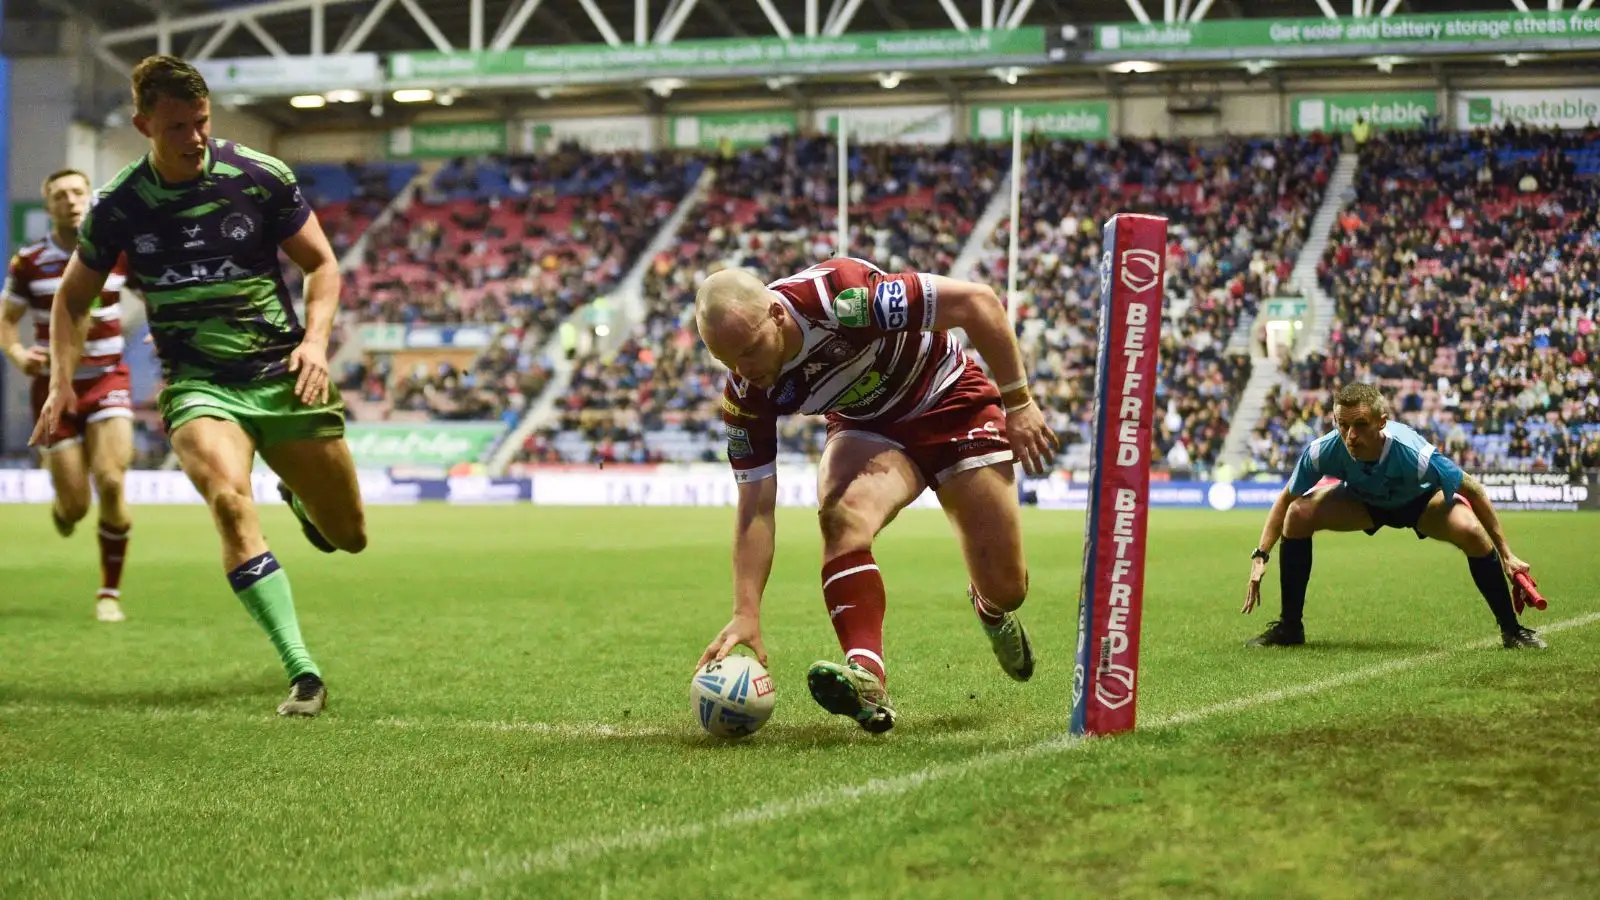 Top try, goal & points scorers in Super League, Championship & League 1 with Wigan Warriors flier extending lead